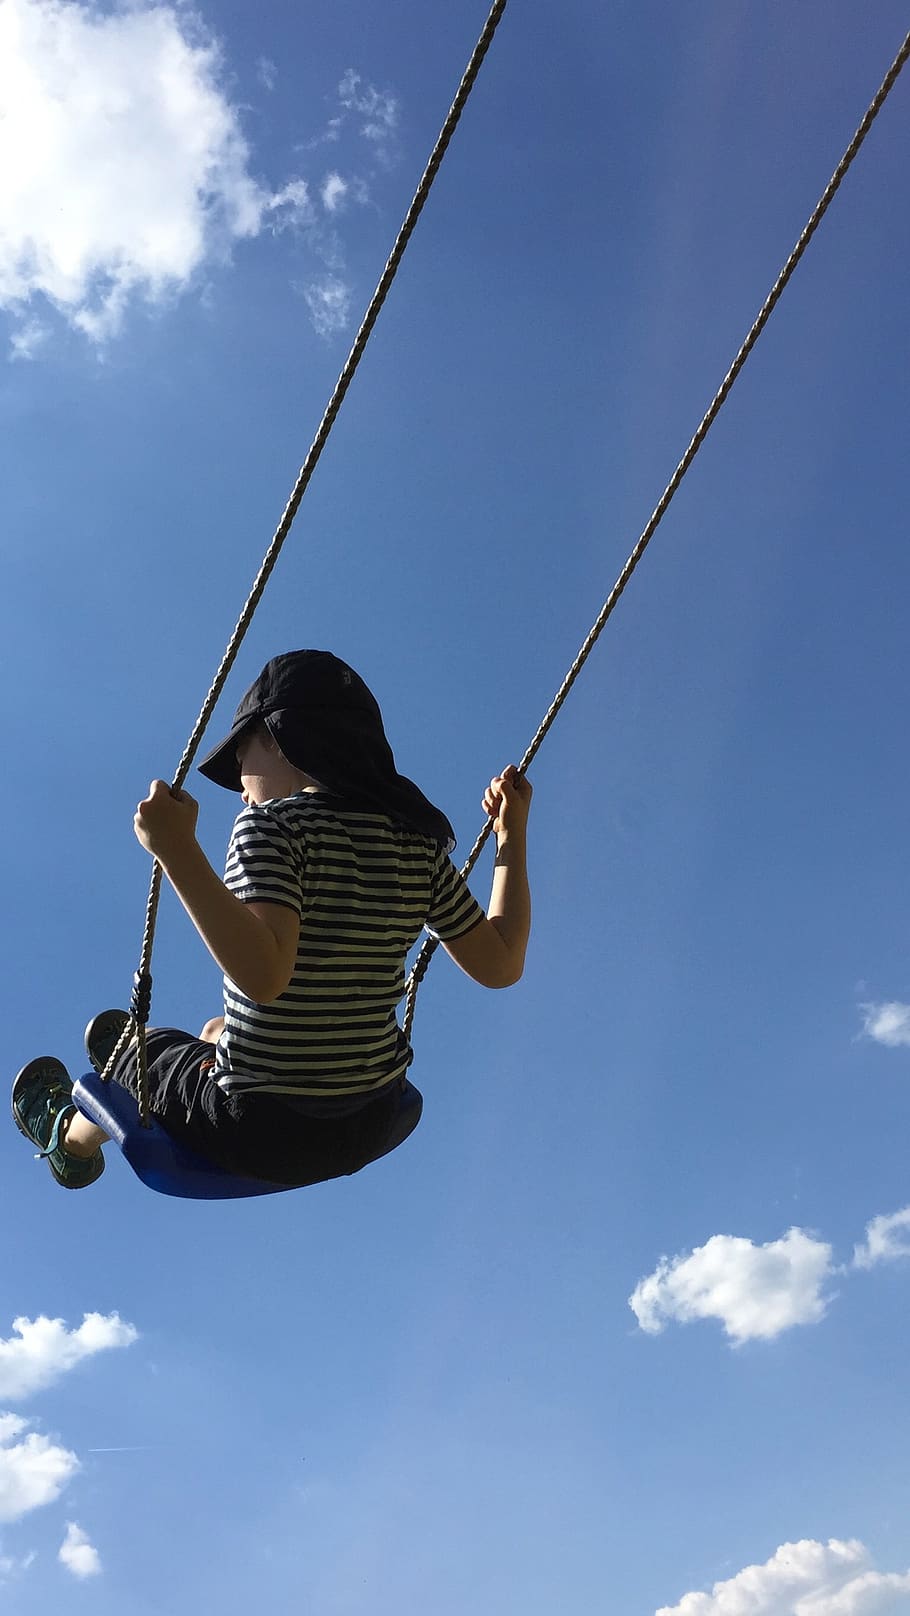 swing, child, sky, sky blue, clouds, fun, joy, one person, leisure activity, low angle view